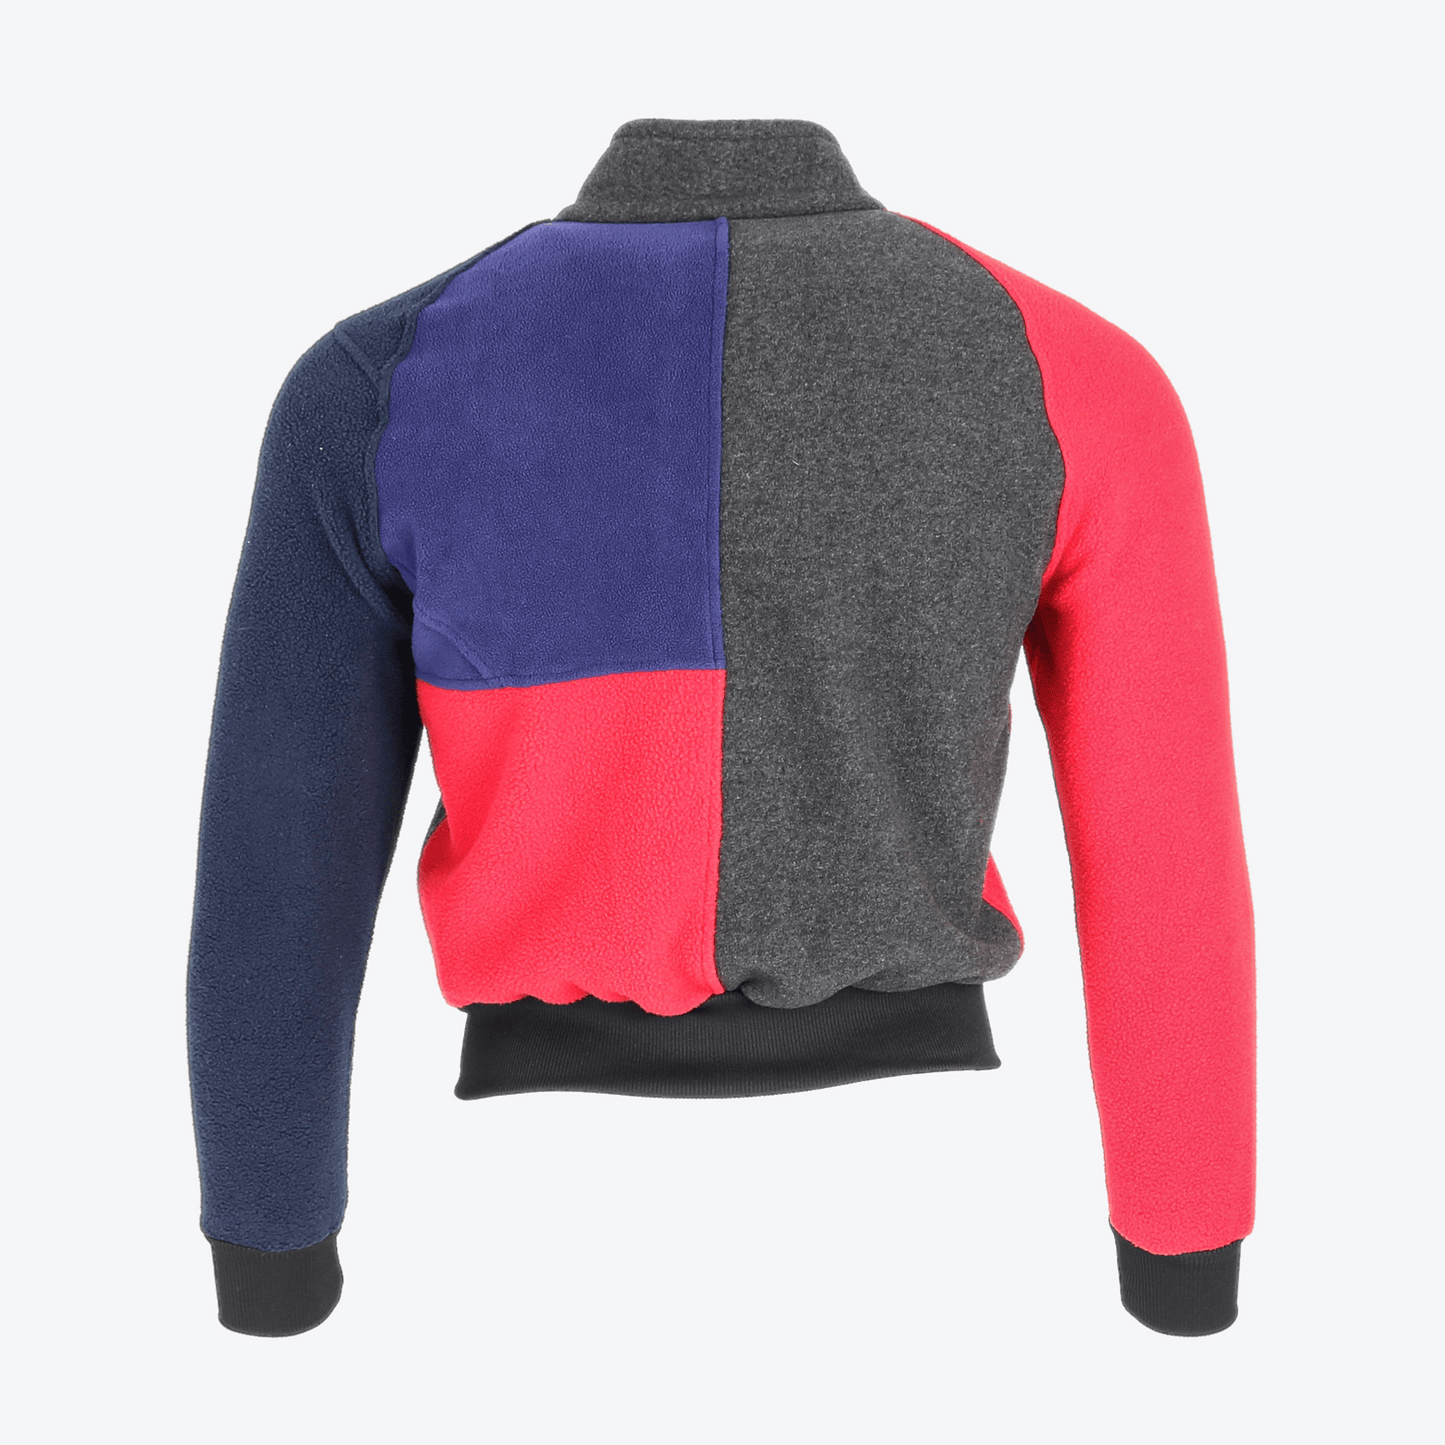 Re-Worked Patagonia Fleece #62 - American Madness